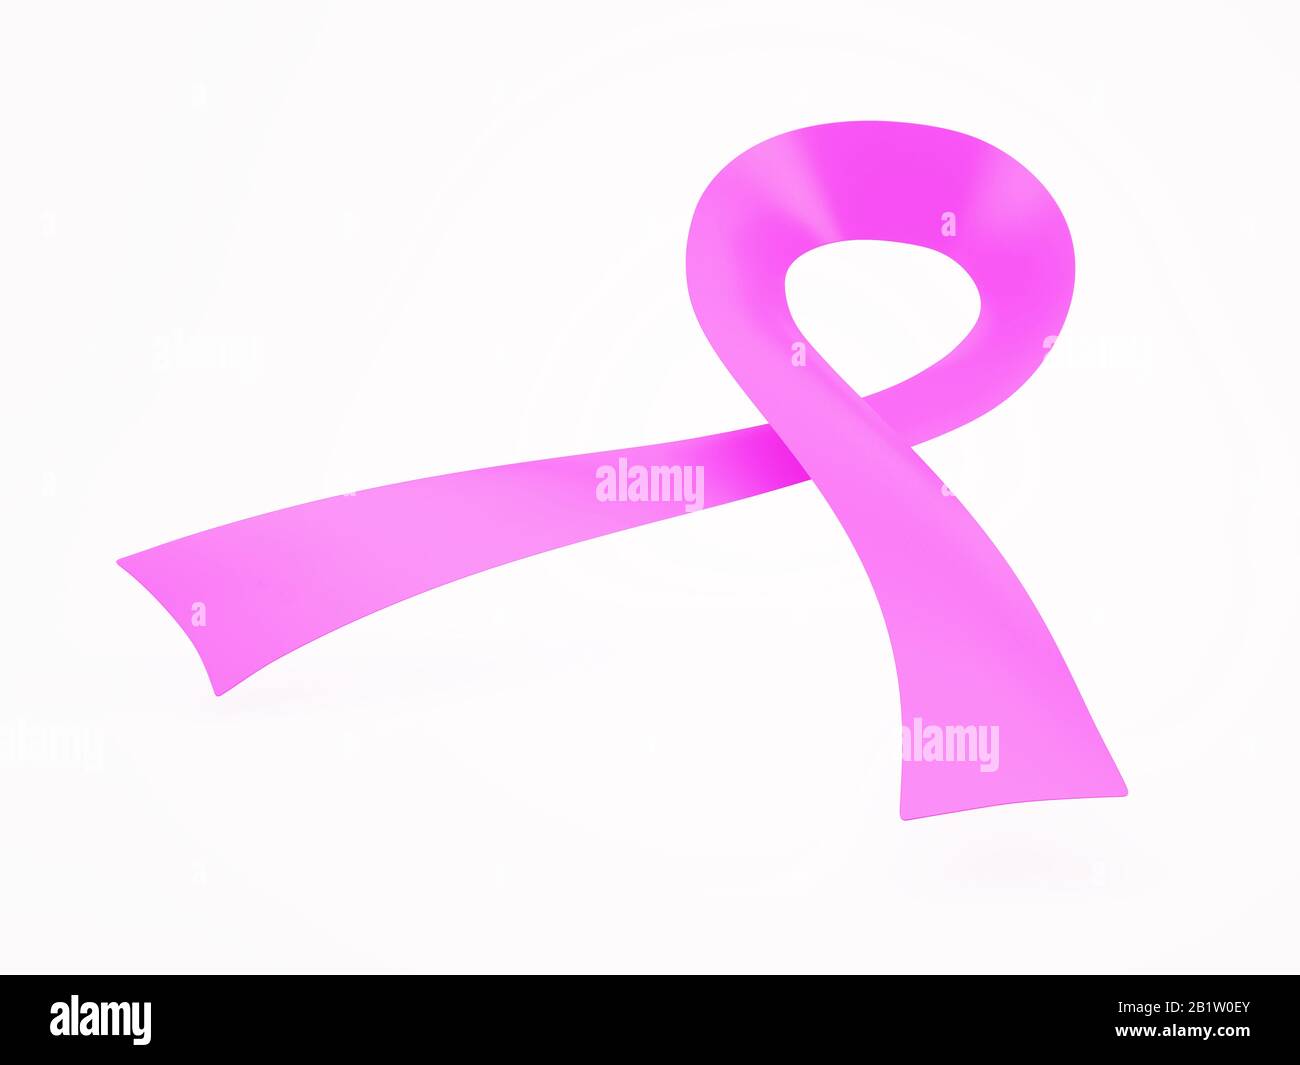 Cancer Awereness Ribbon - 3D illustration of women's health issues Stock Photo